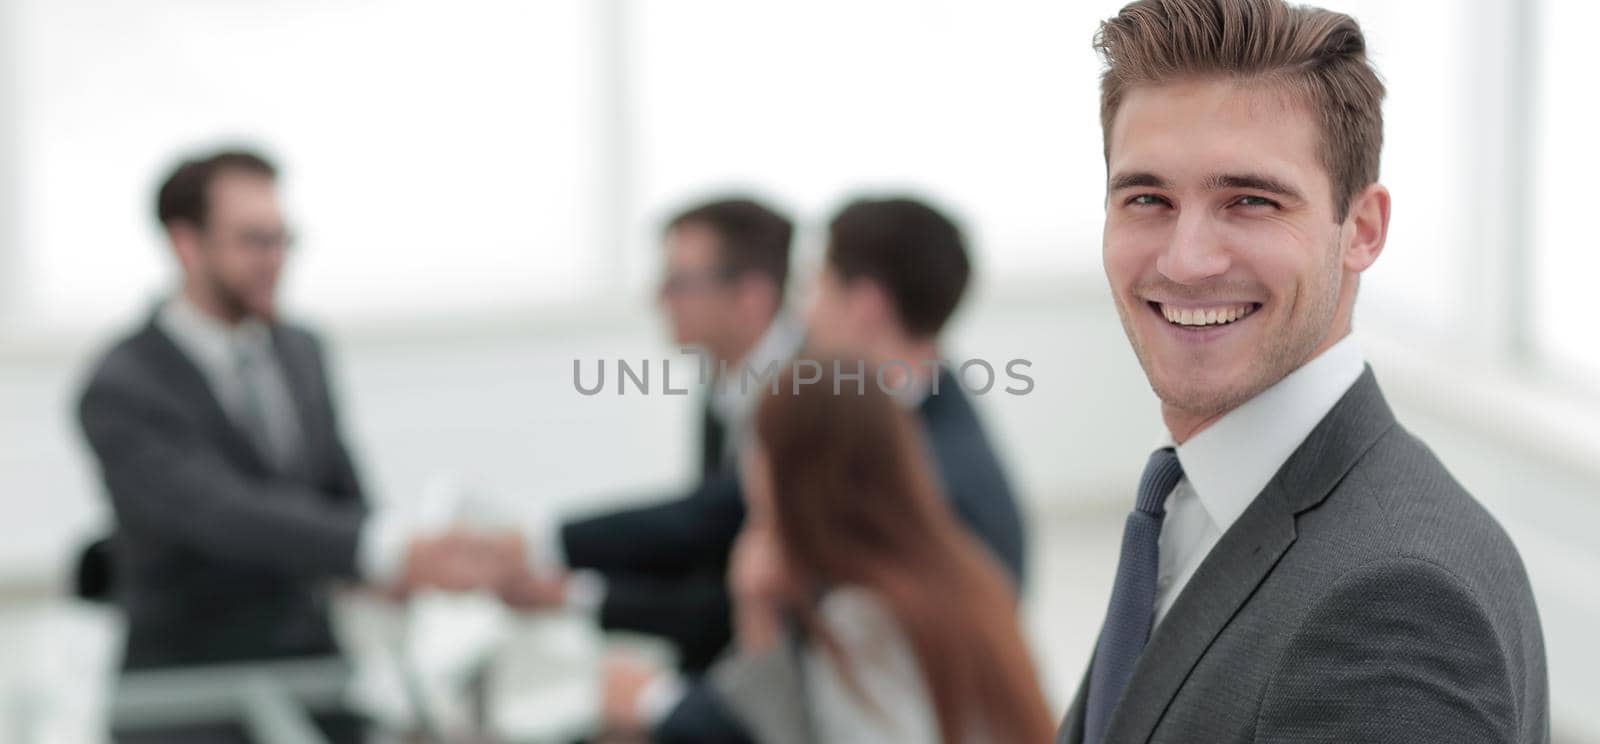 portrait of businessman on blurred background by asdf